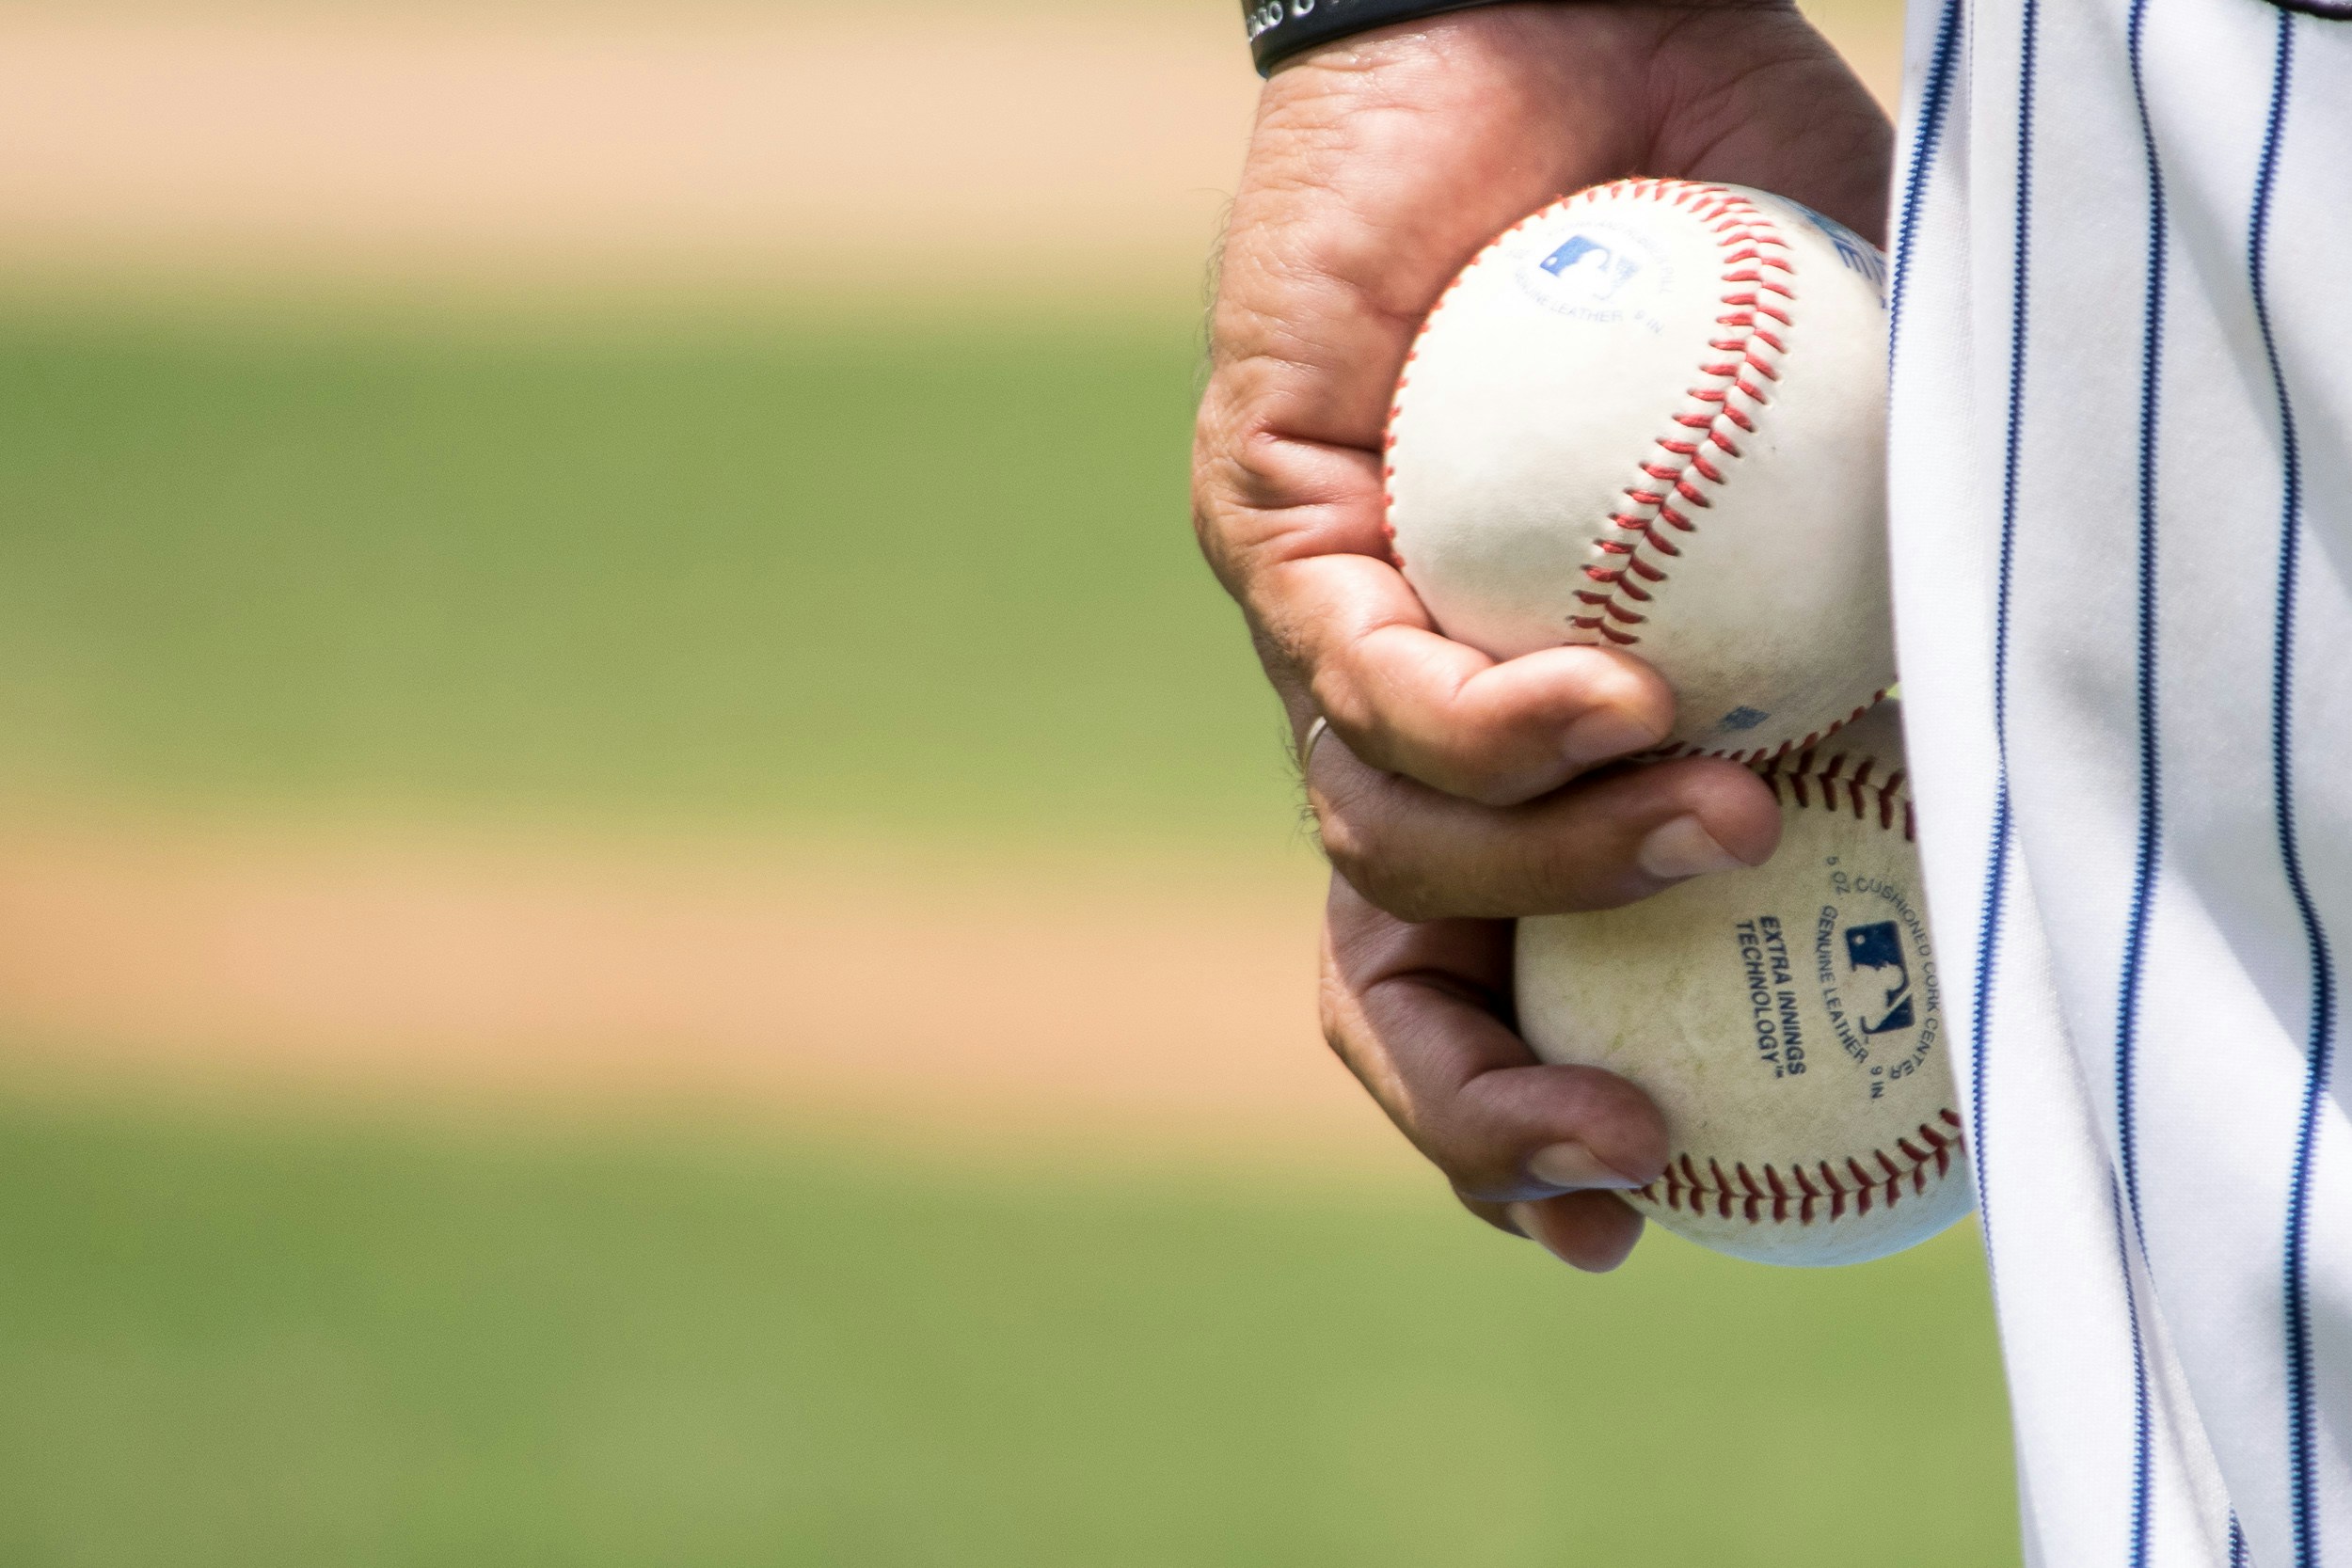 A player's hand holding two baseballs.